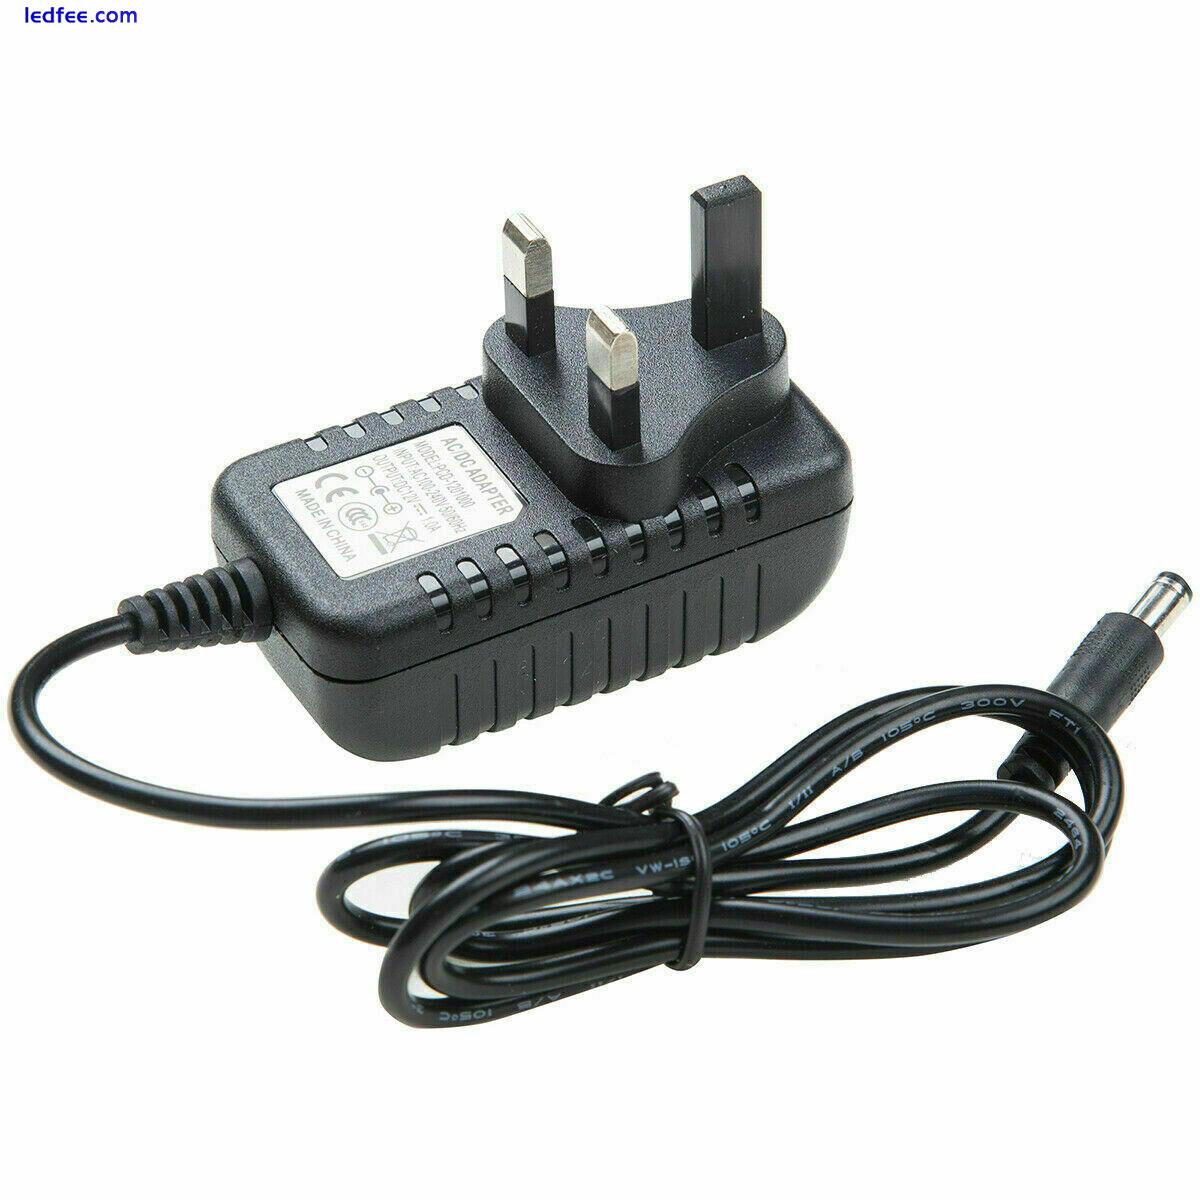 12V 1A 2A AC DC Power Supply Adapter LED Strip for Light CCTV Camera DCE Cables 4 